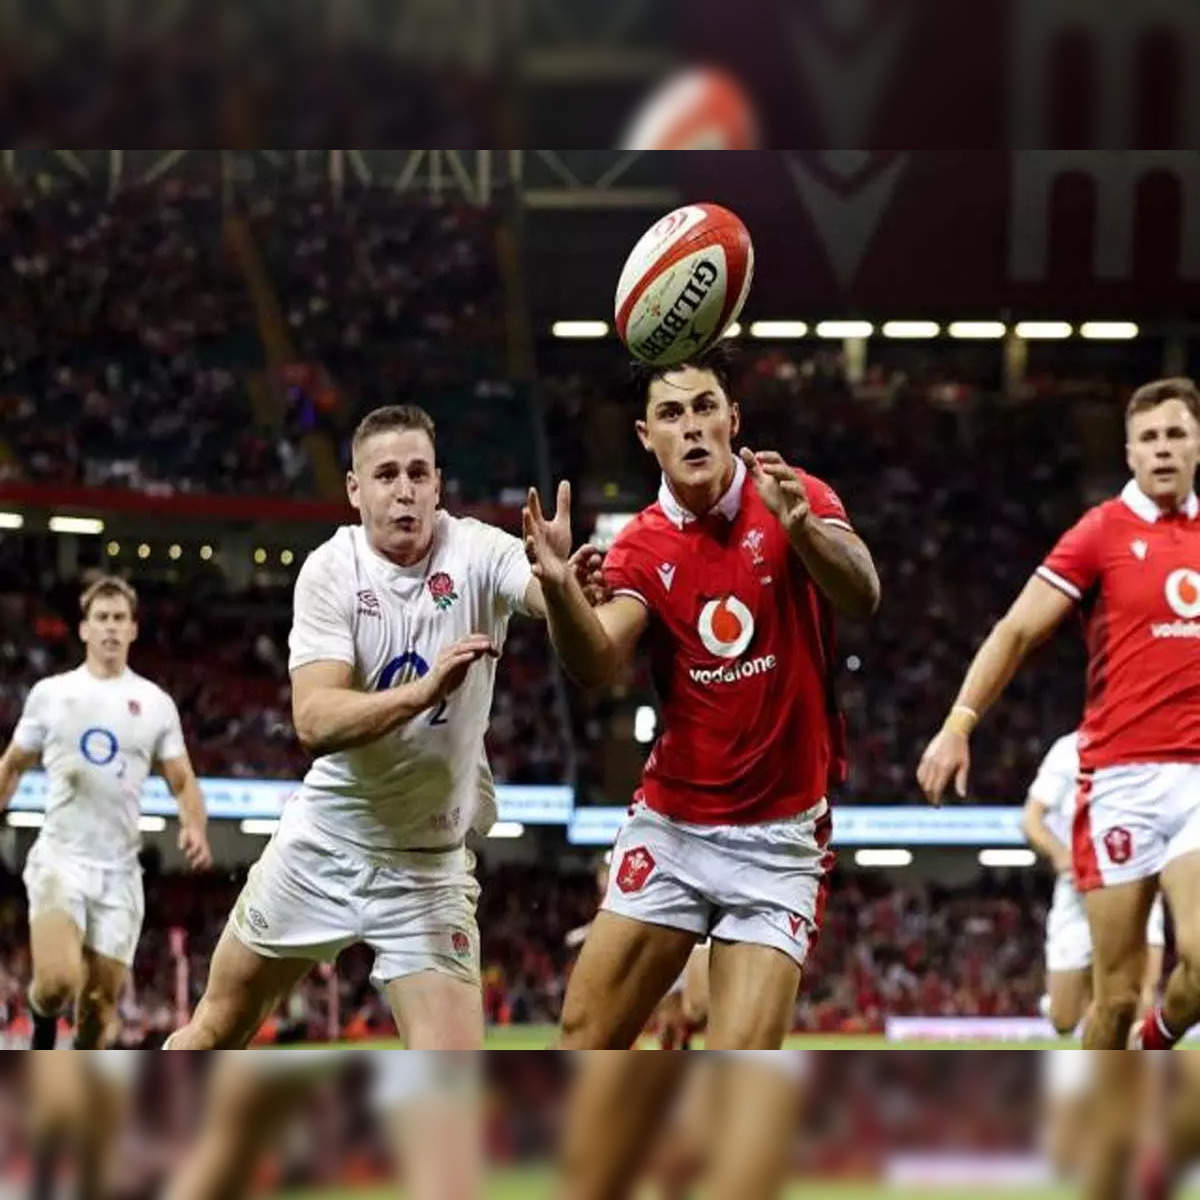 England vs Wales See rugby clashs date, time, venue, how to watch on TV, live stream and more